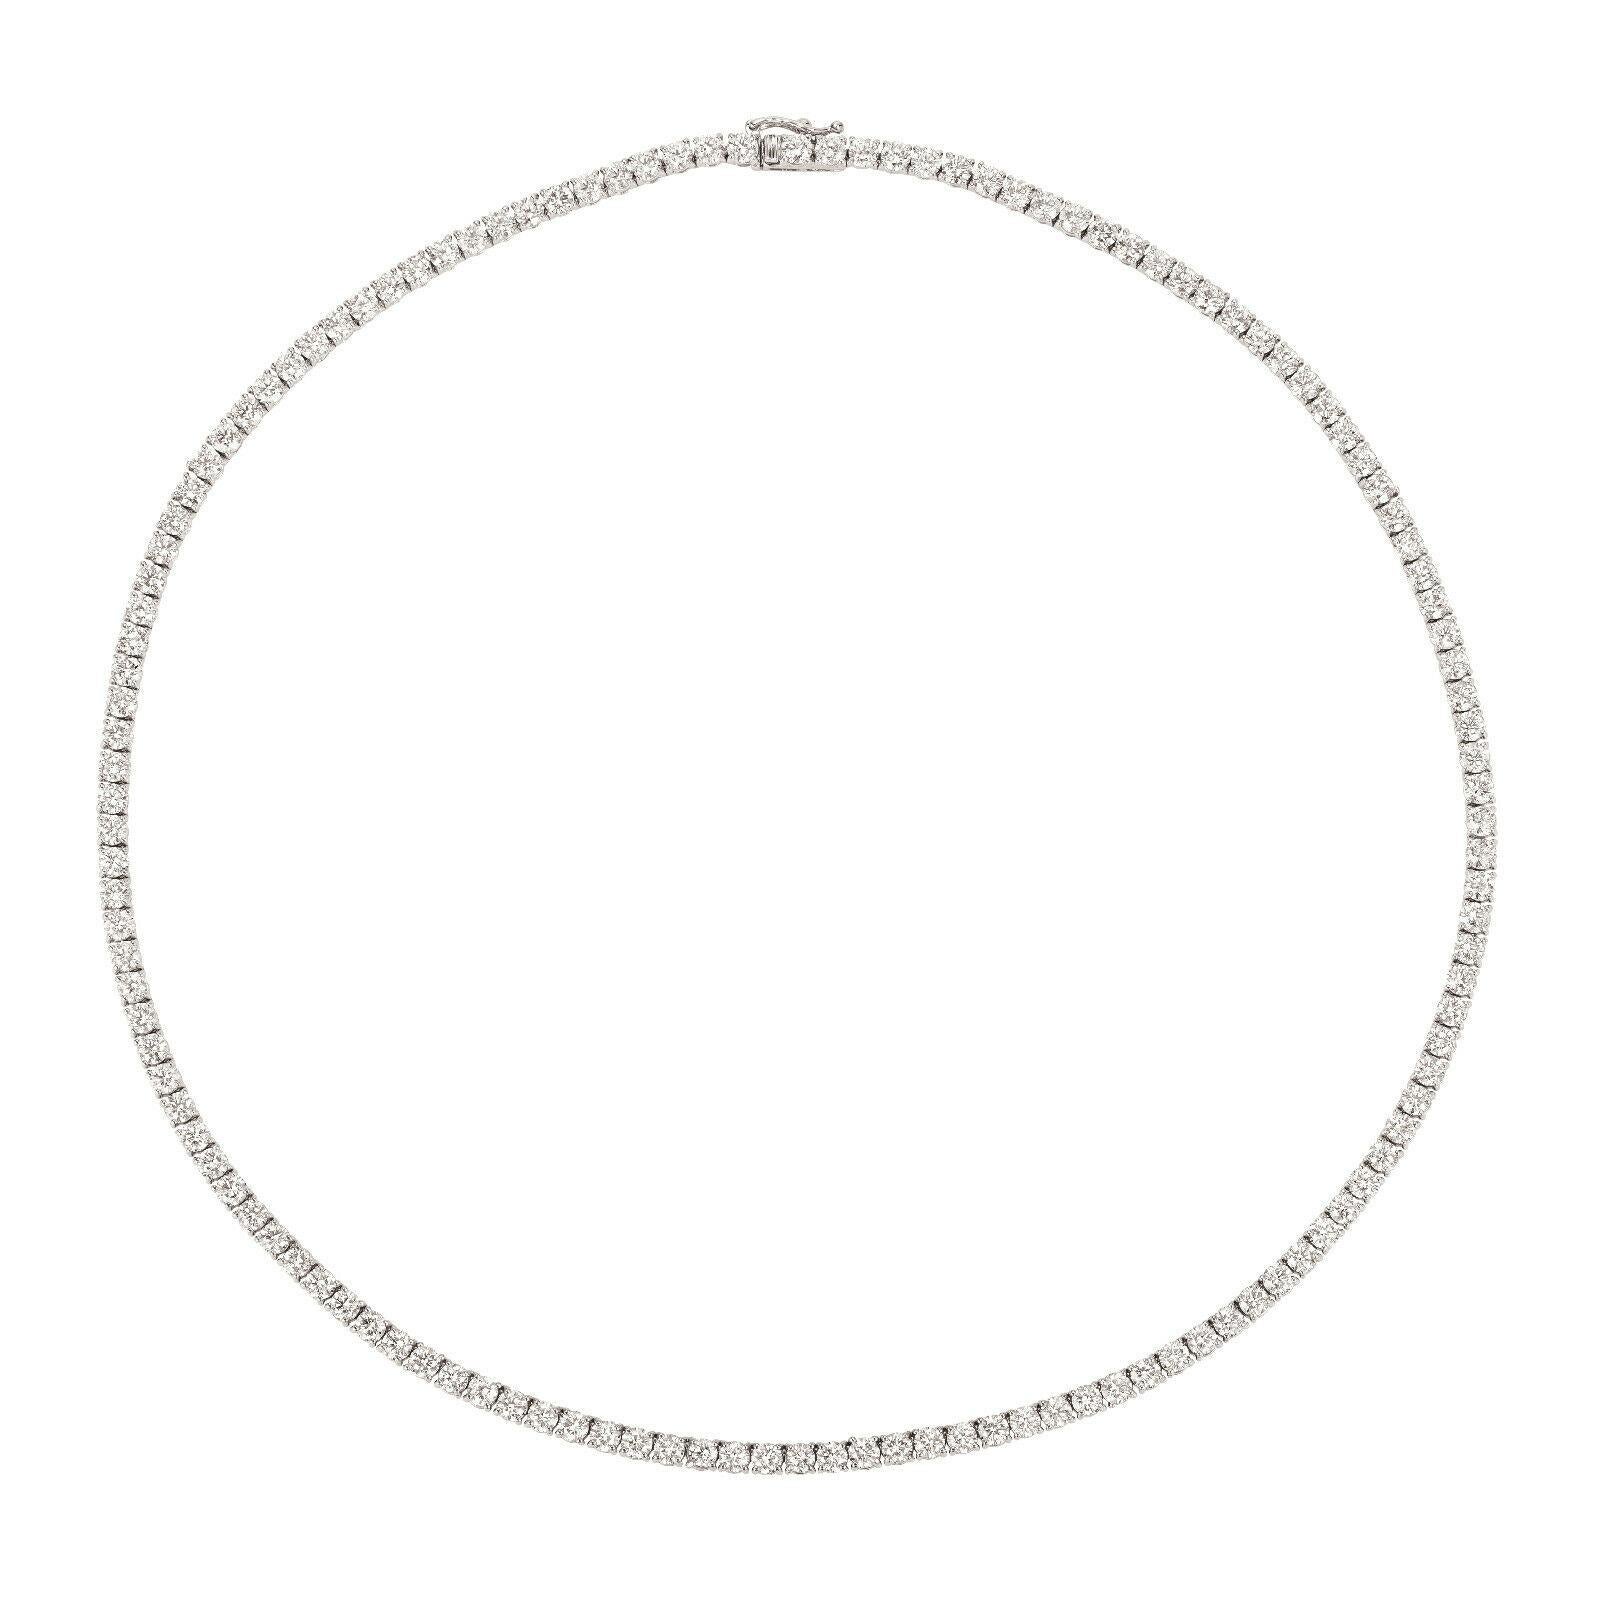 10.00 Carat Diamond Tennis Necklace G SI 14K White Gold 16 inches

100% Natural Diamonds, Not Enhanced in any way Round Cut Diamond Necklace 
10.00CT
G-H 
SI 
14K White Gold, Pave, 12.7 gram
16 inches in length, 1/8 inch in width
147